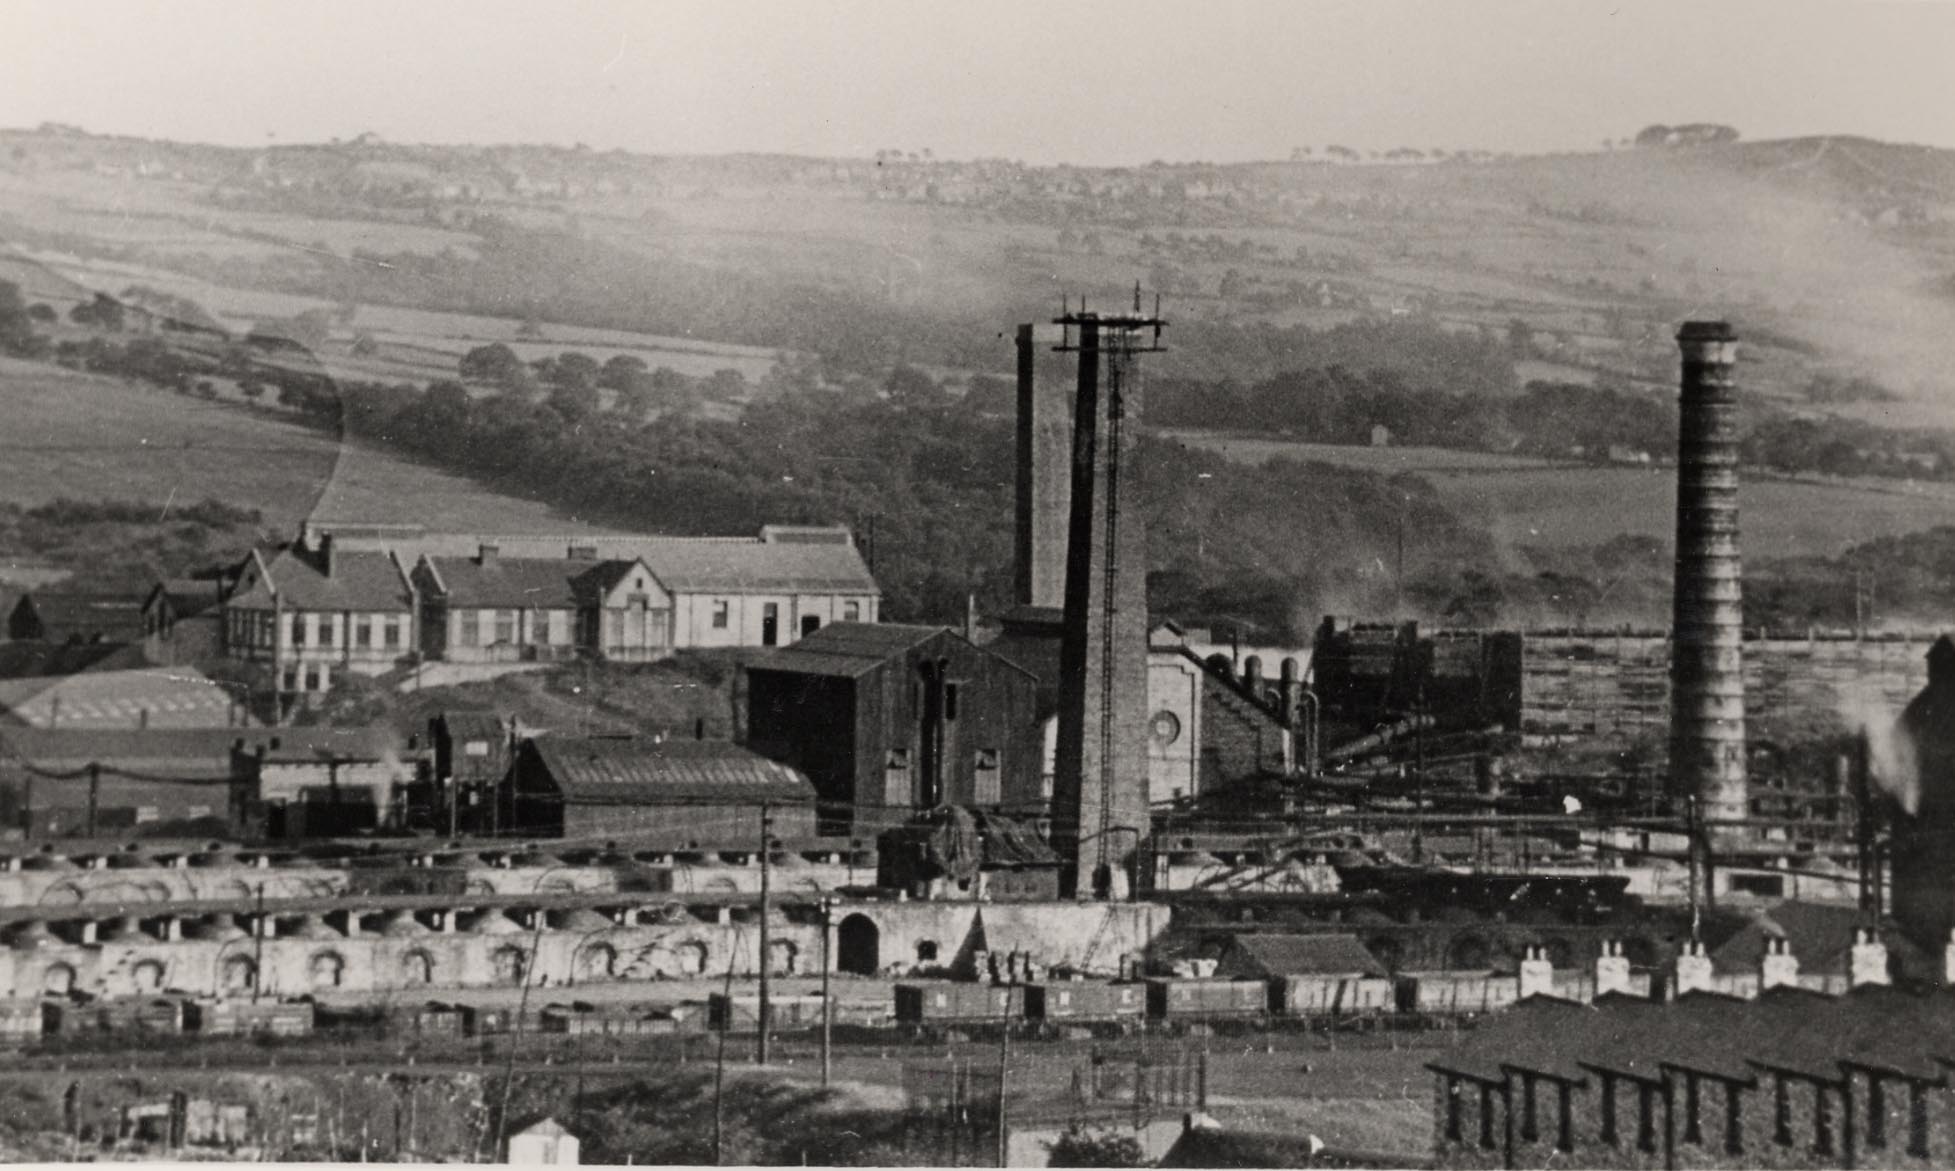 Whinfield Coke Works, Rowlands Gill